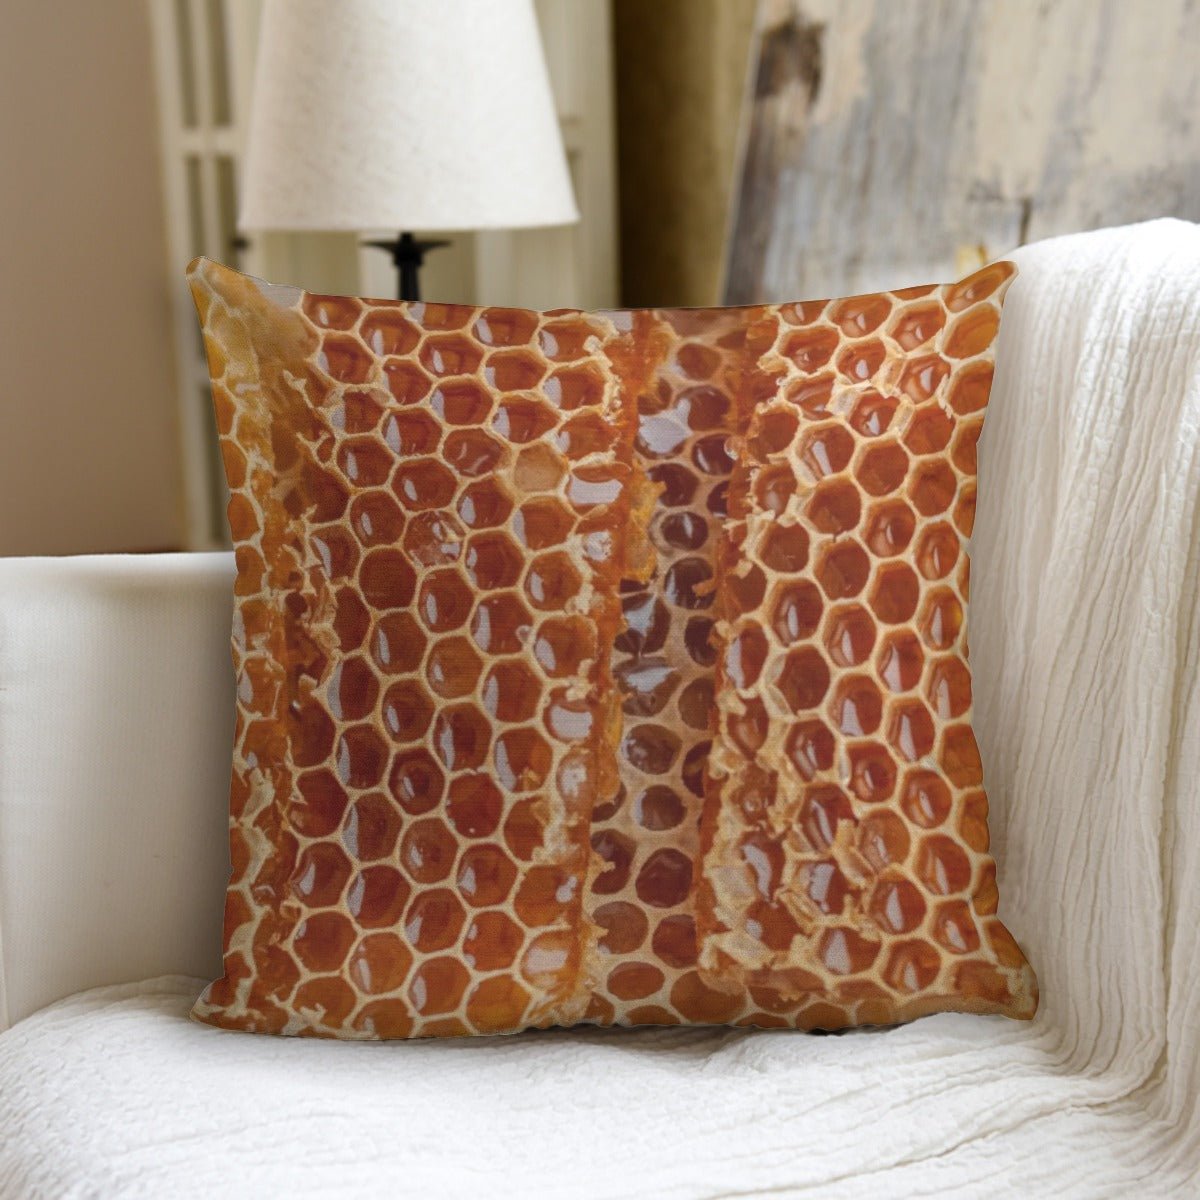 Anna Phylactic - Honeycomb Logo Pillow - dragqueenmerch